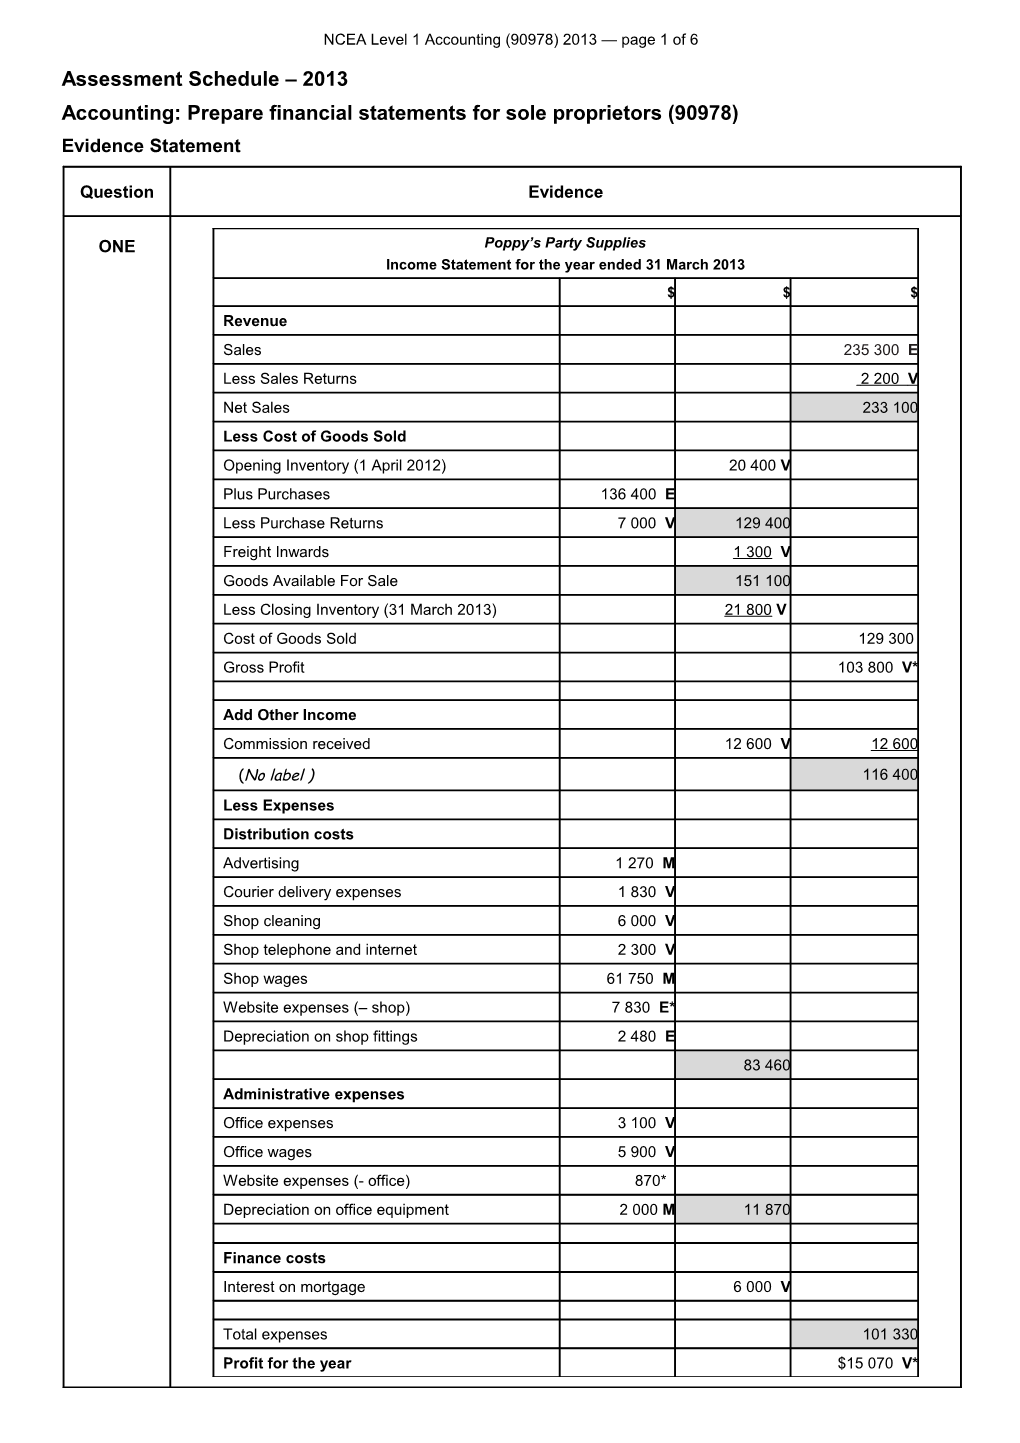 NCEA Level 1 Accounting (90978) 2013 Assessment Schedule